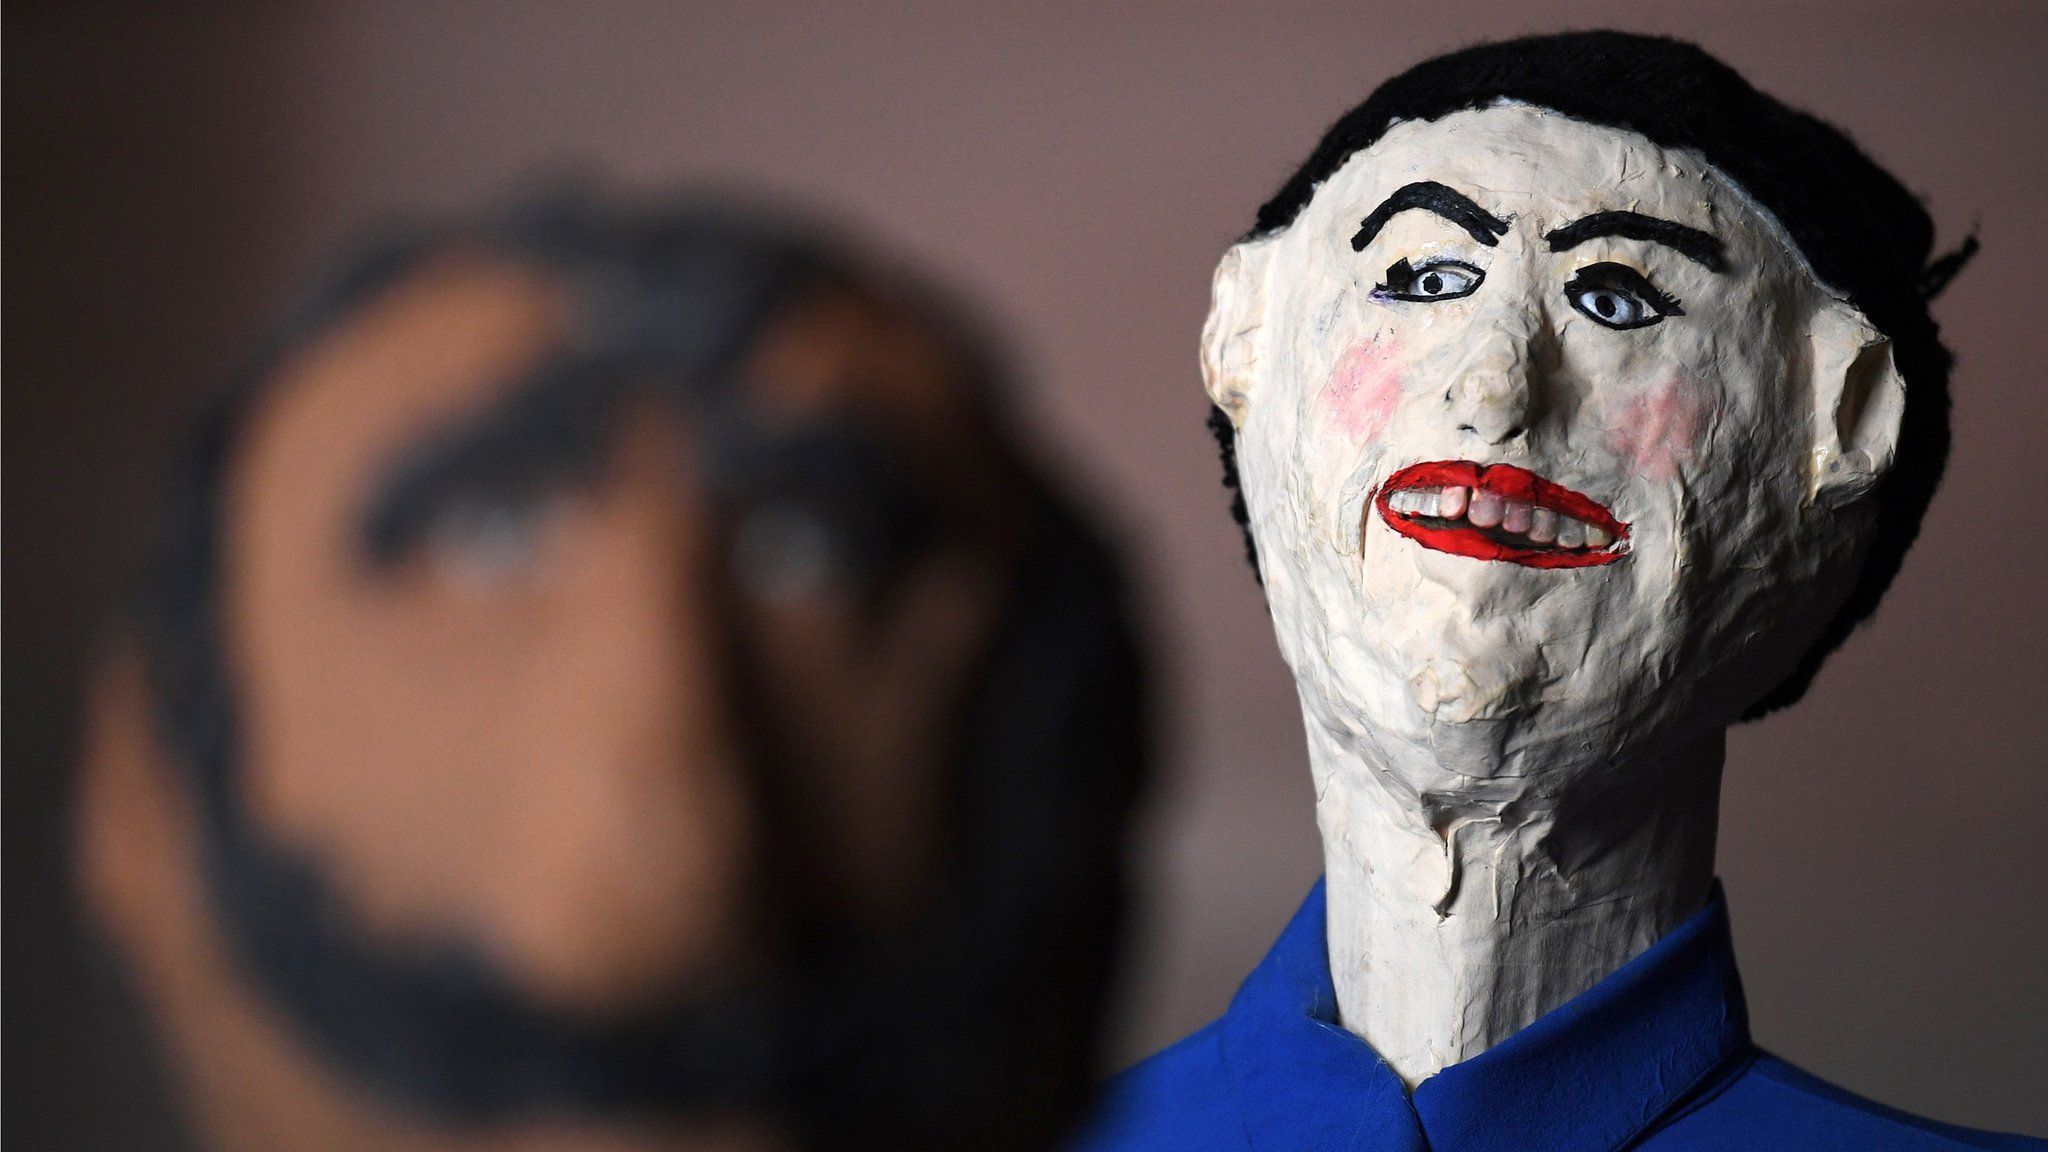 Oscar Murillo's papier mache people were nominated for last year's prize